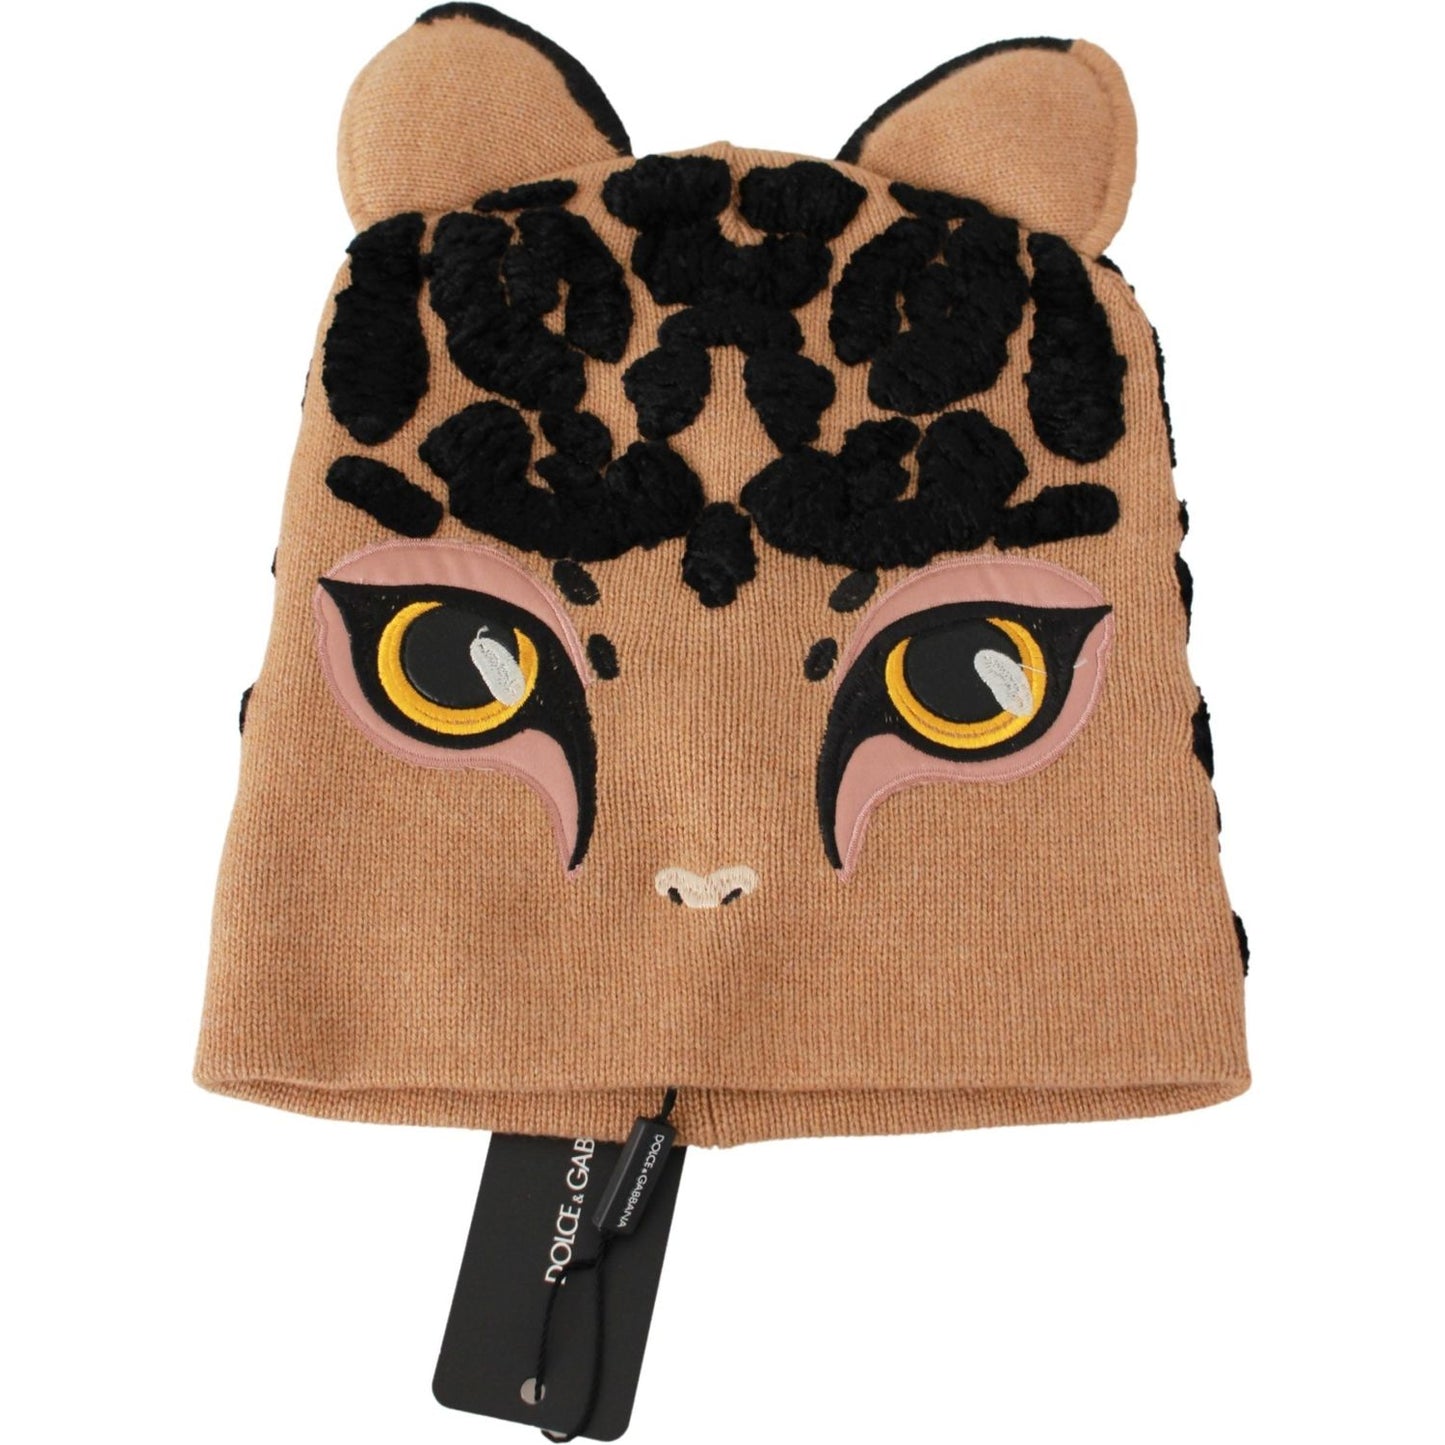 Dolce & Gabbana Brown Cats Eye Embroidered Beanie Cashmere Hat brown-cats-eye-embroidered-beanie-cashmere-hat Beanie Hat IMG_7425-scaled-7d7b99f3-20e.jpg